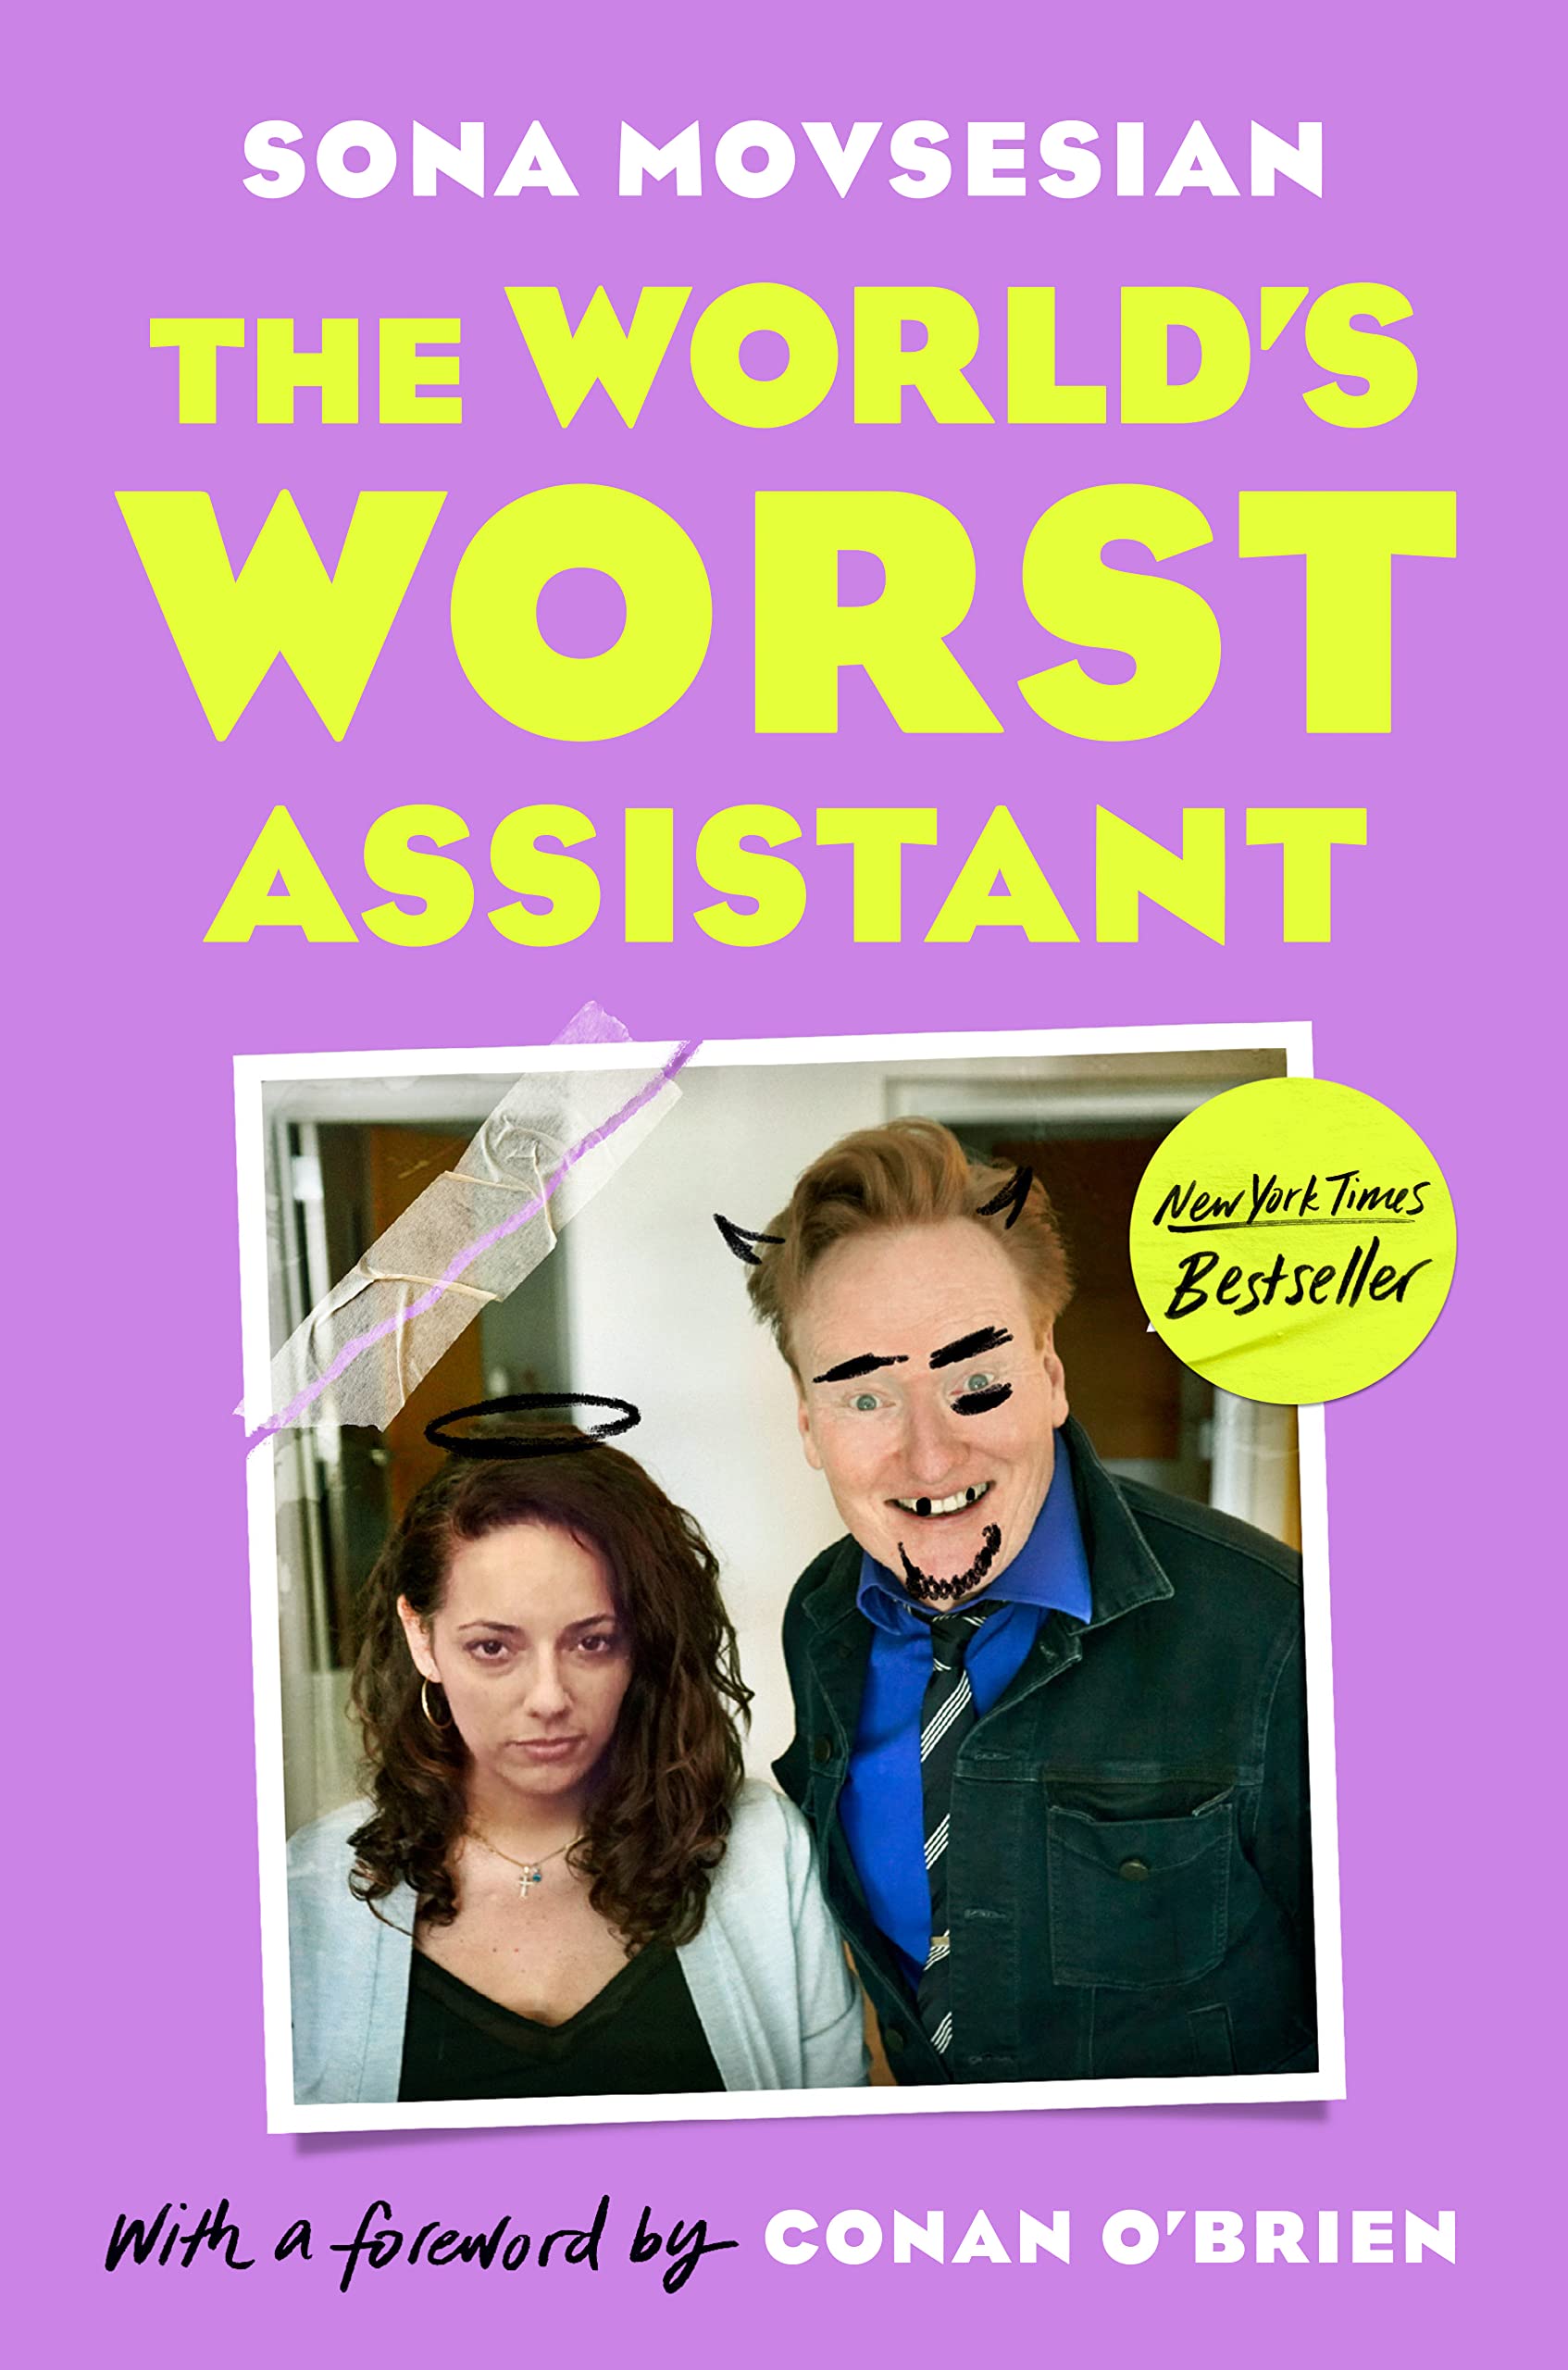 funny book covers the world's worst assistant